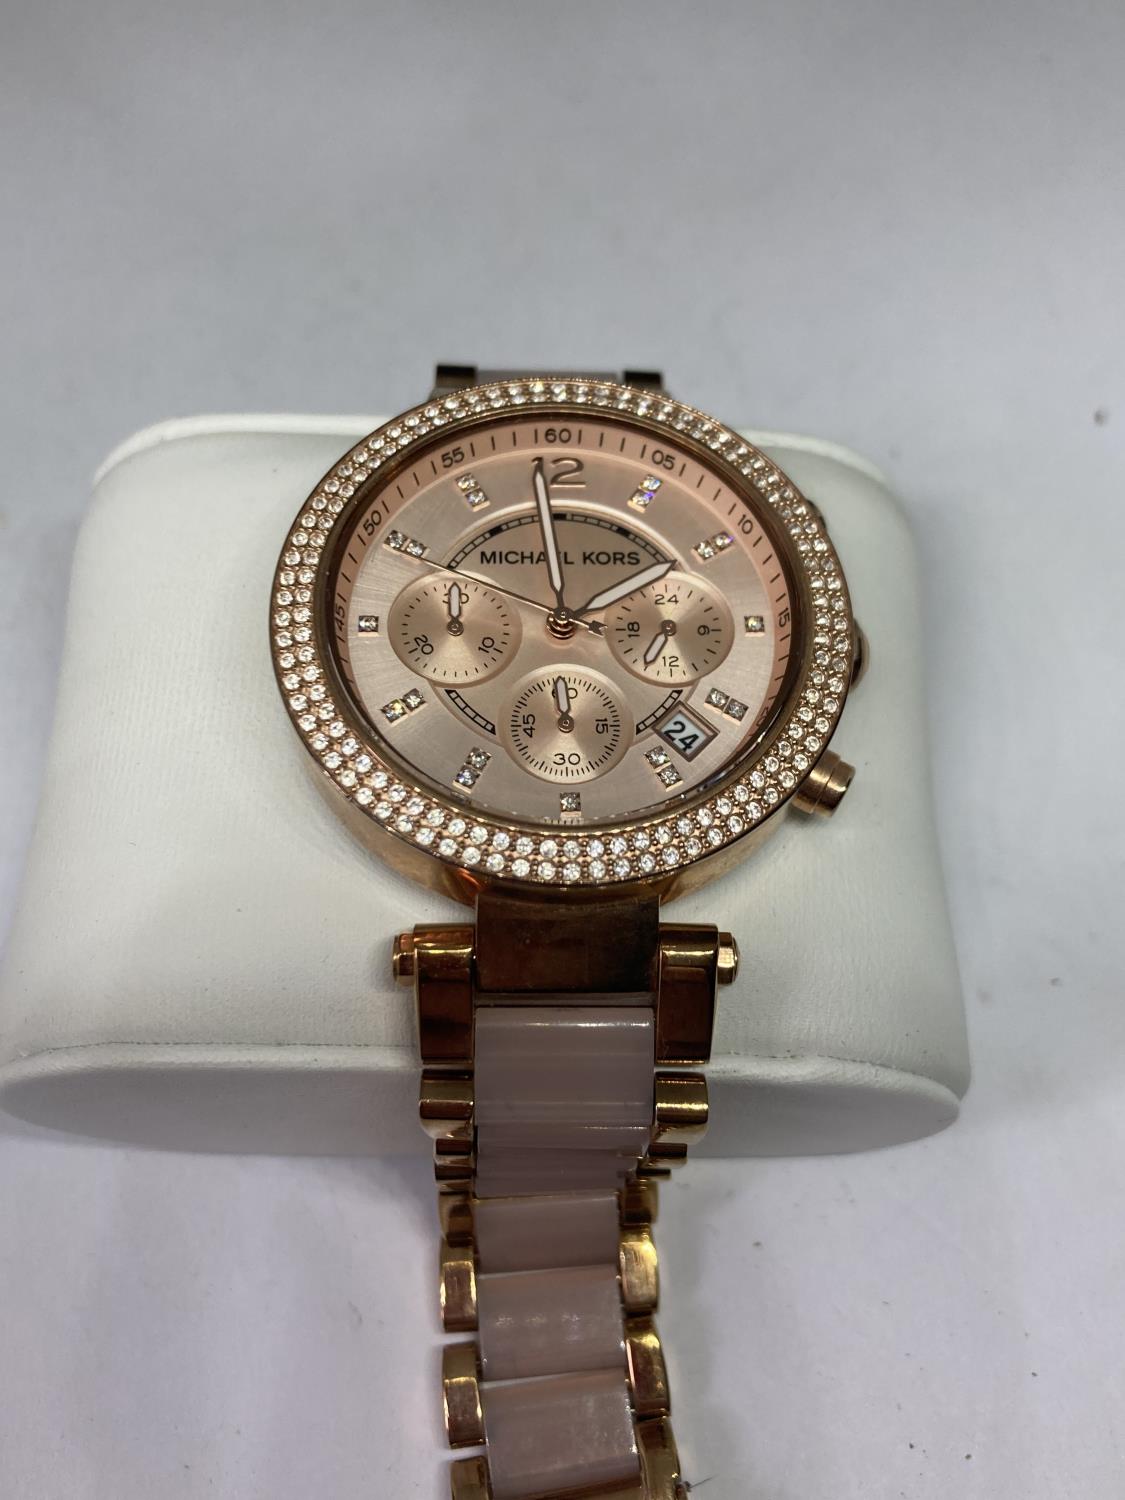 A MICHAEL KORS WRIST WATCH IN ROSE GOLD WITH PRESENTATION BOX (NEEDS BATTERY AND STRAP) - Image 2 of 4